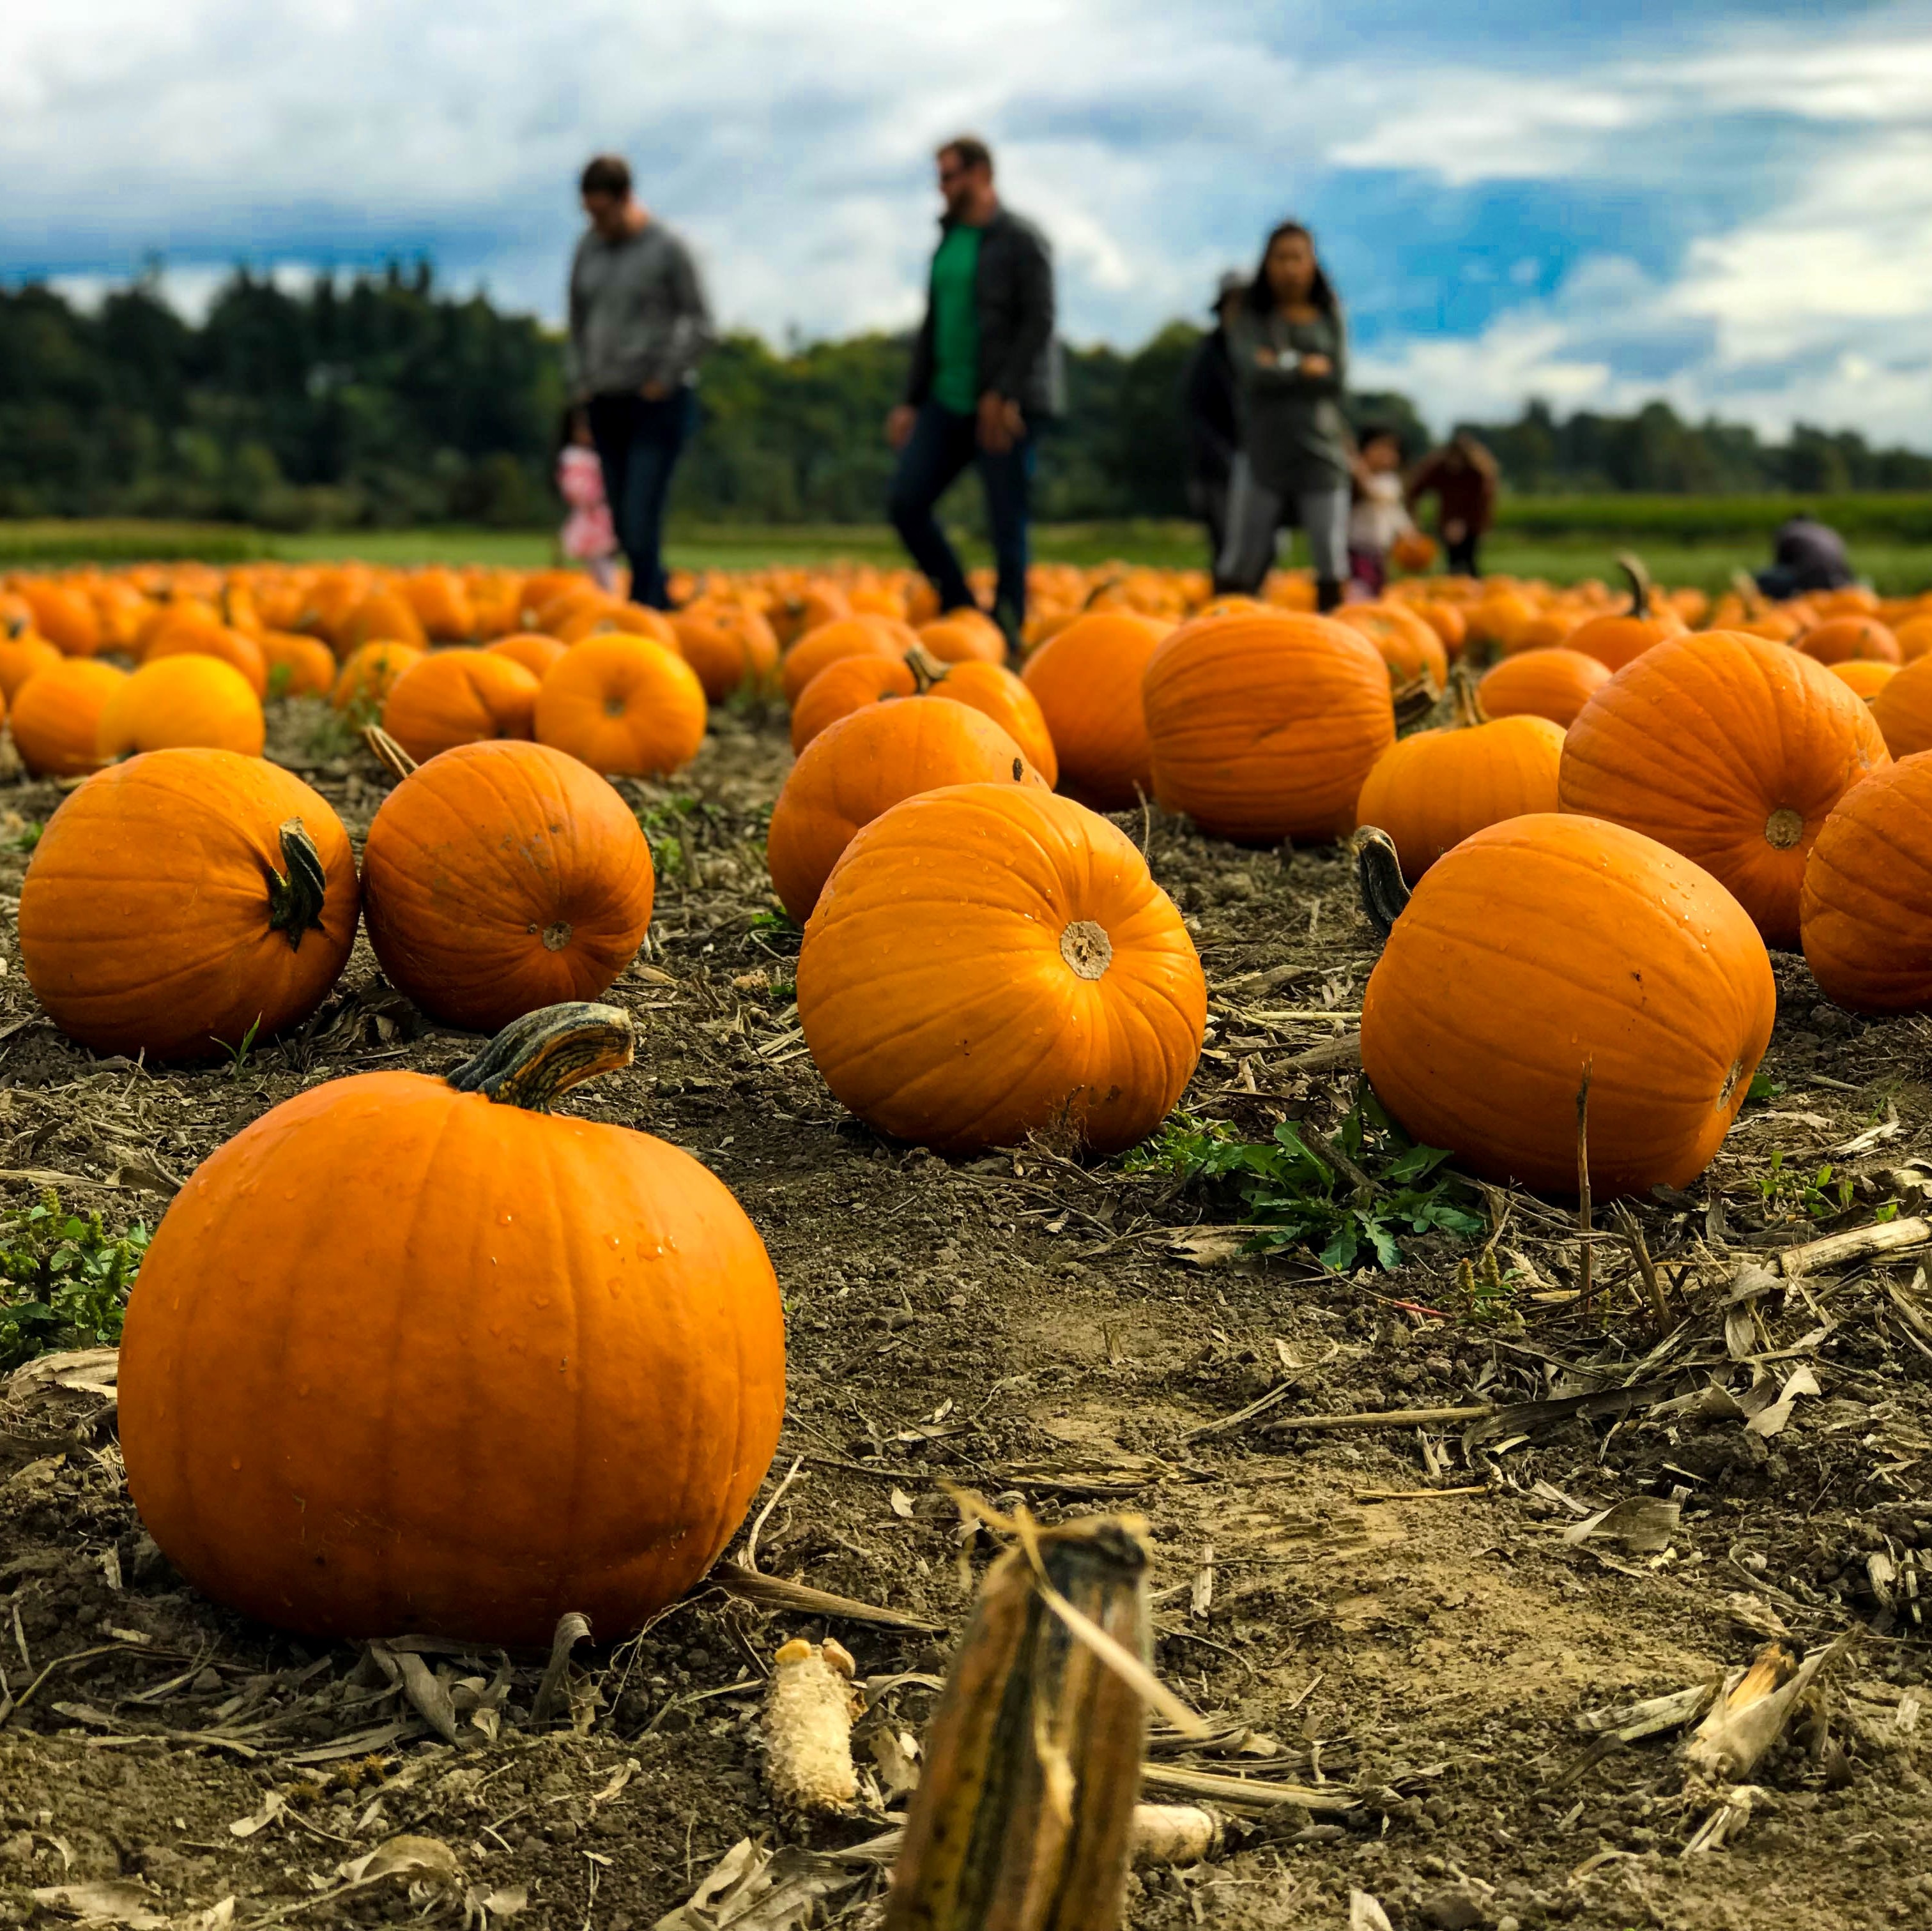 Fall Events in Your Neck of the Woods